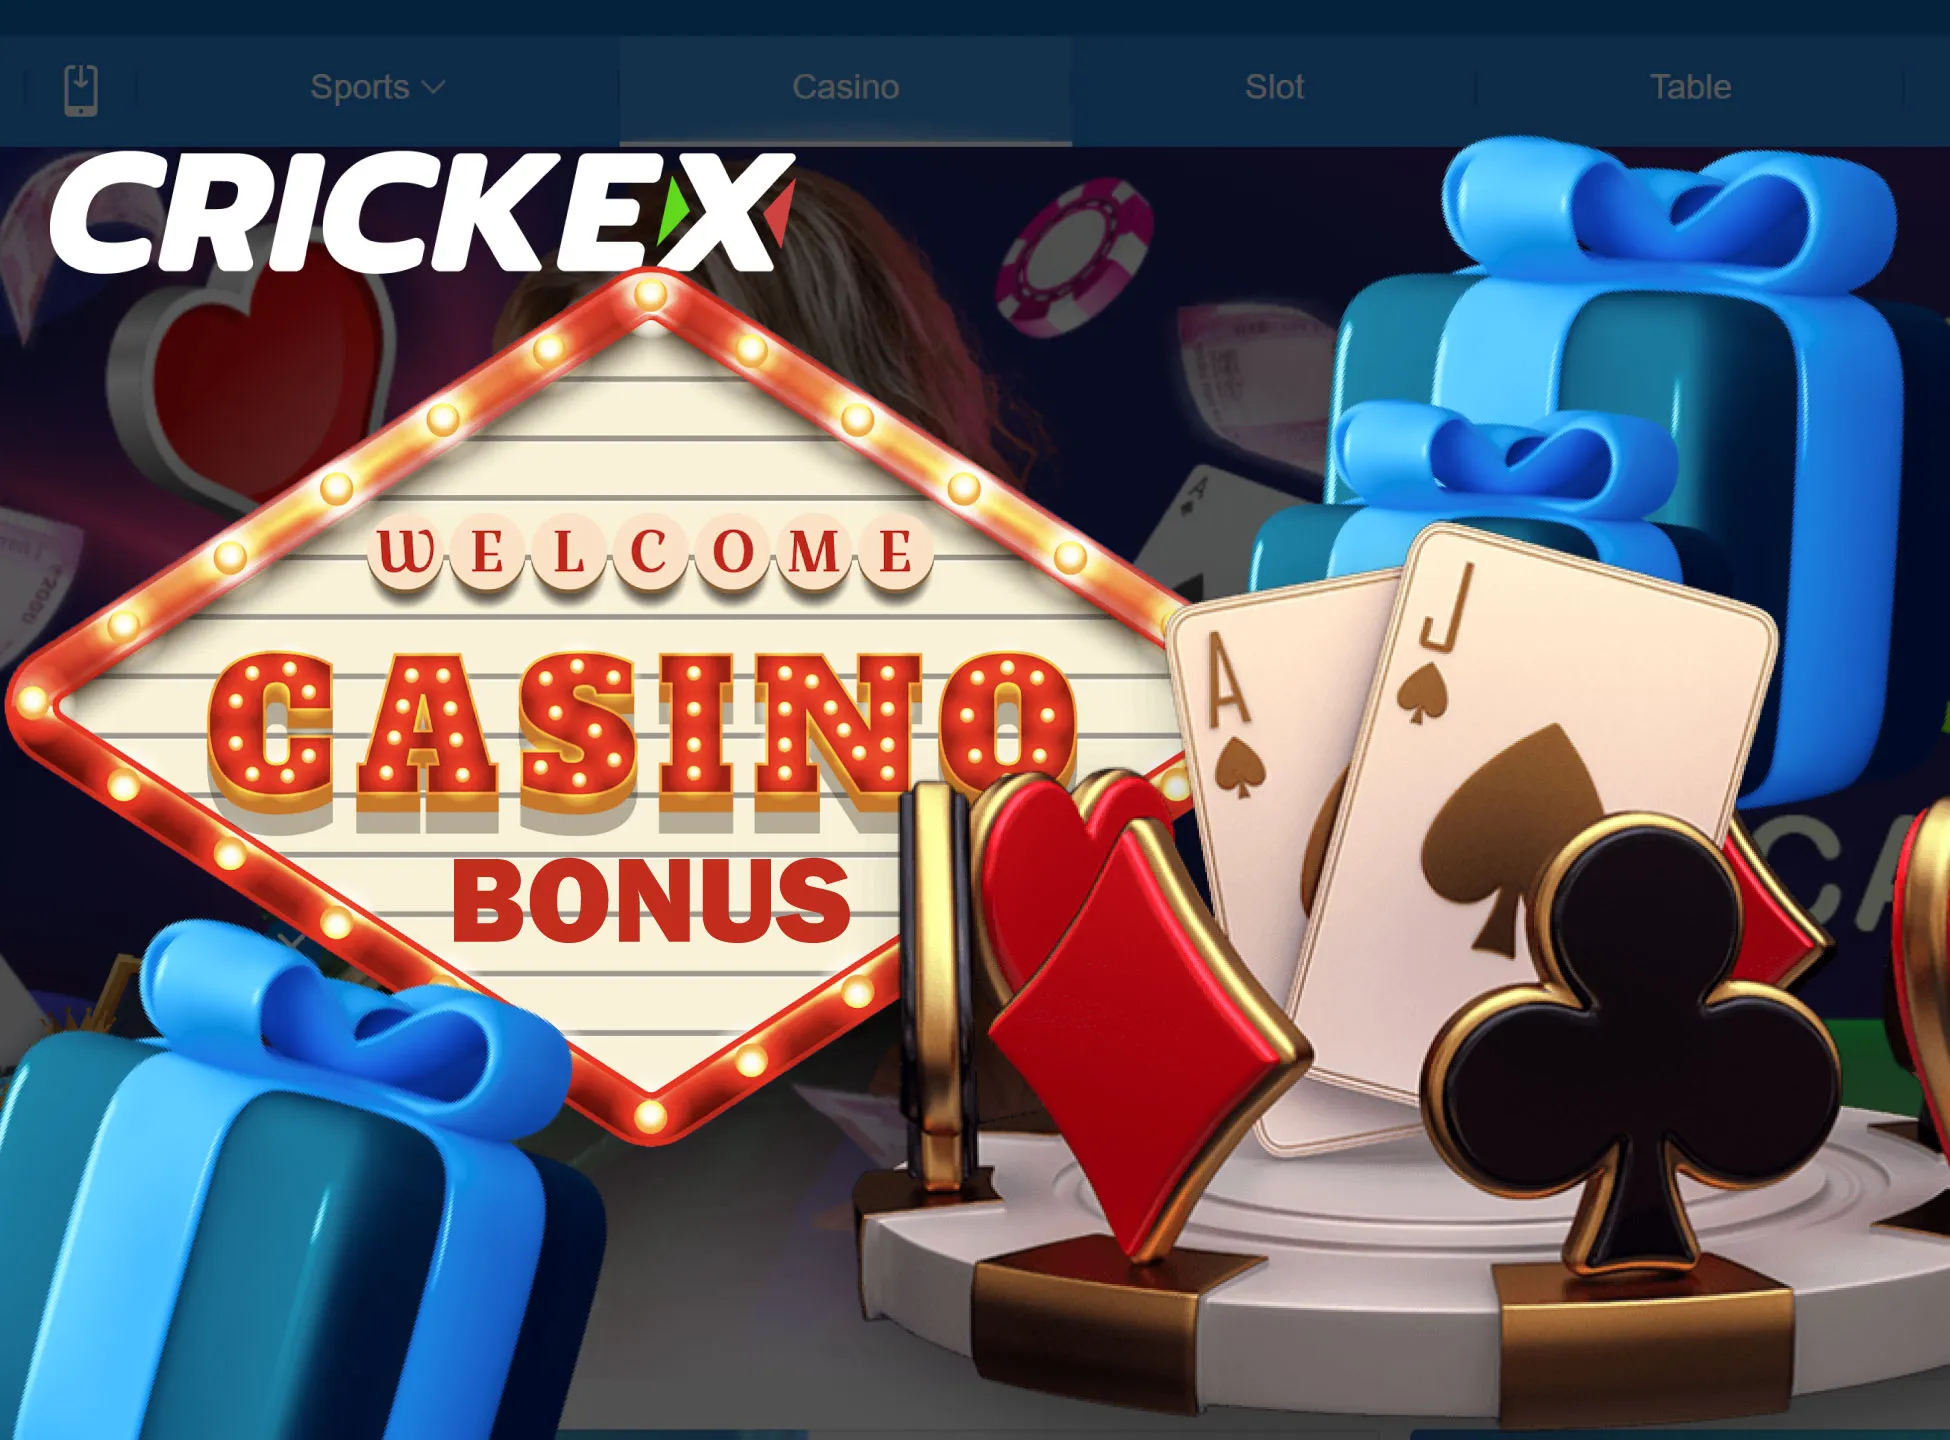 You can receiv a 5% bonus on the casino slots.